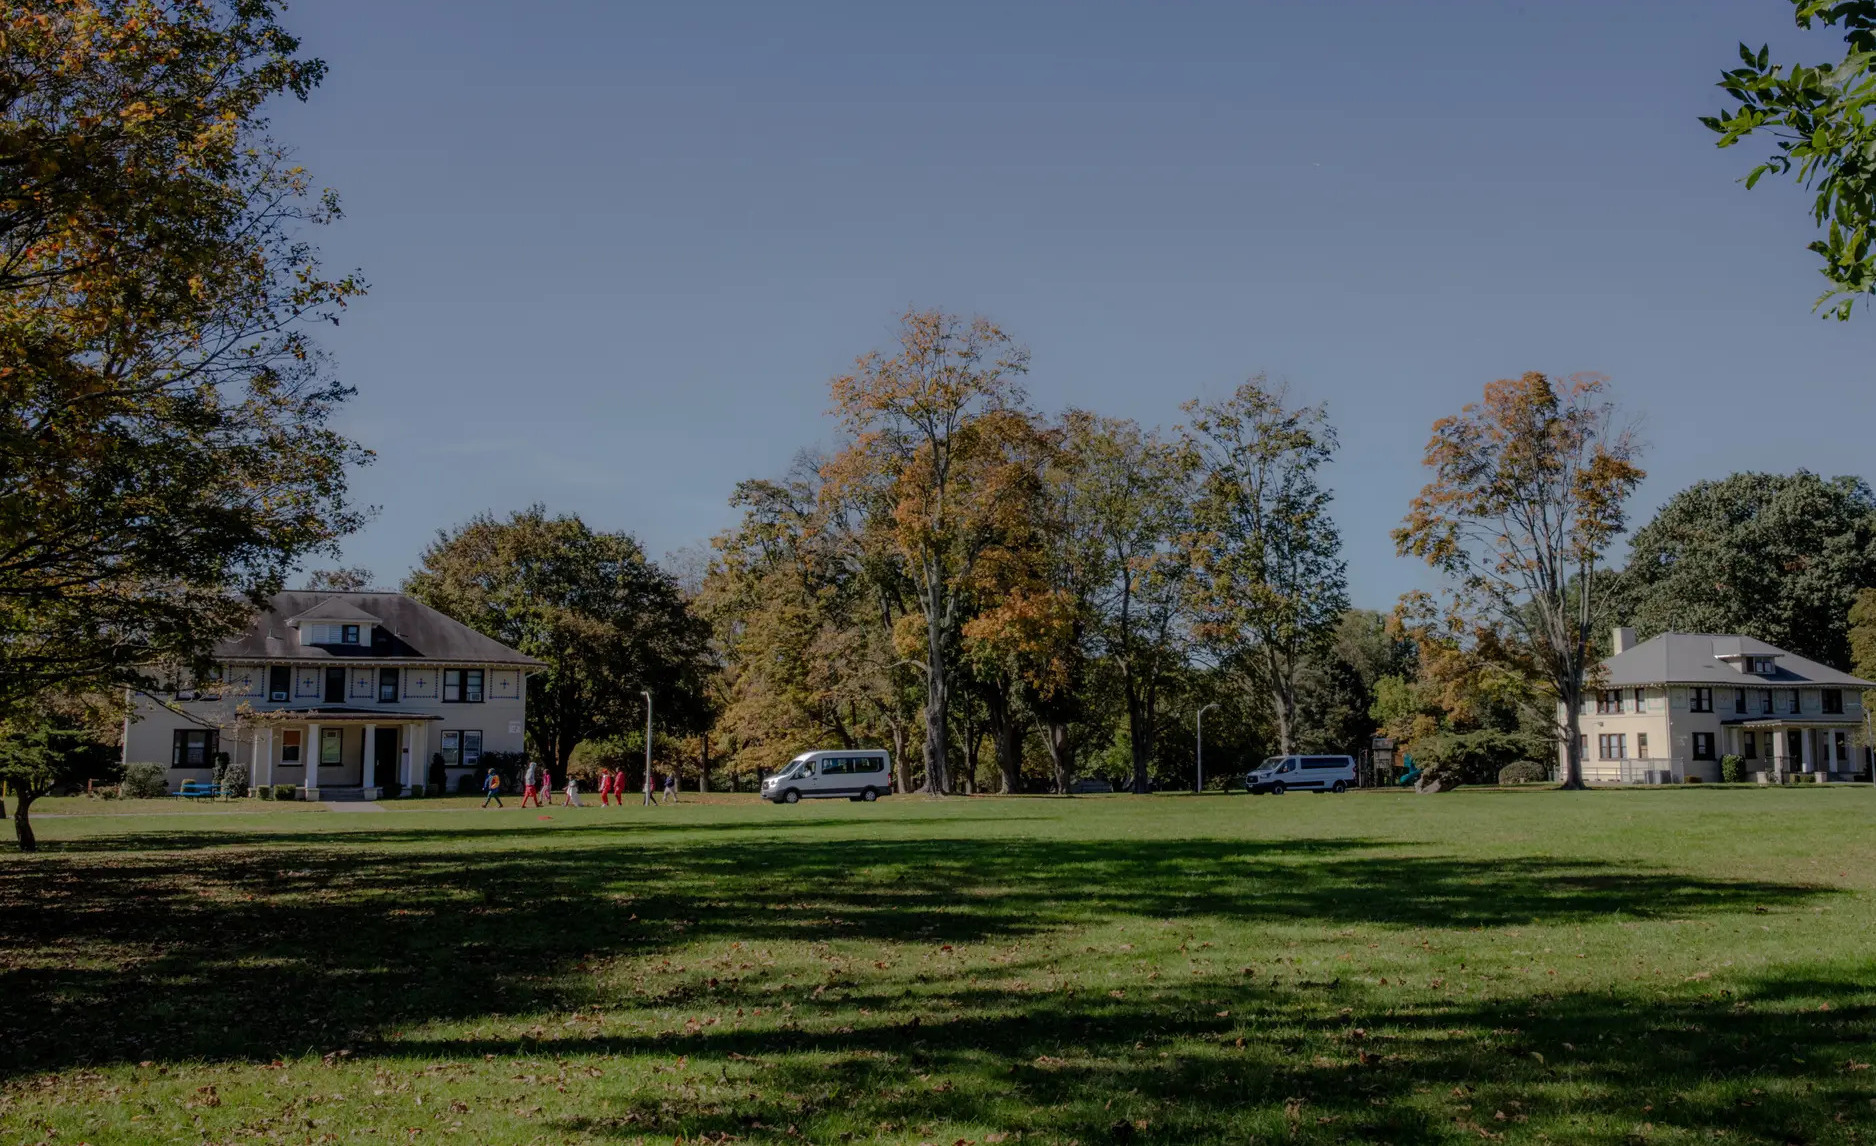 Foster teen mental health: Two traditional style, beige, 2-story buildings sit far back behind a huge lawn surrounded by tall, leady trees under clear blue sky.